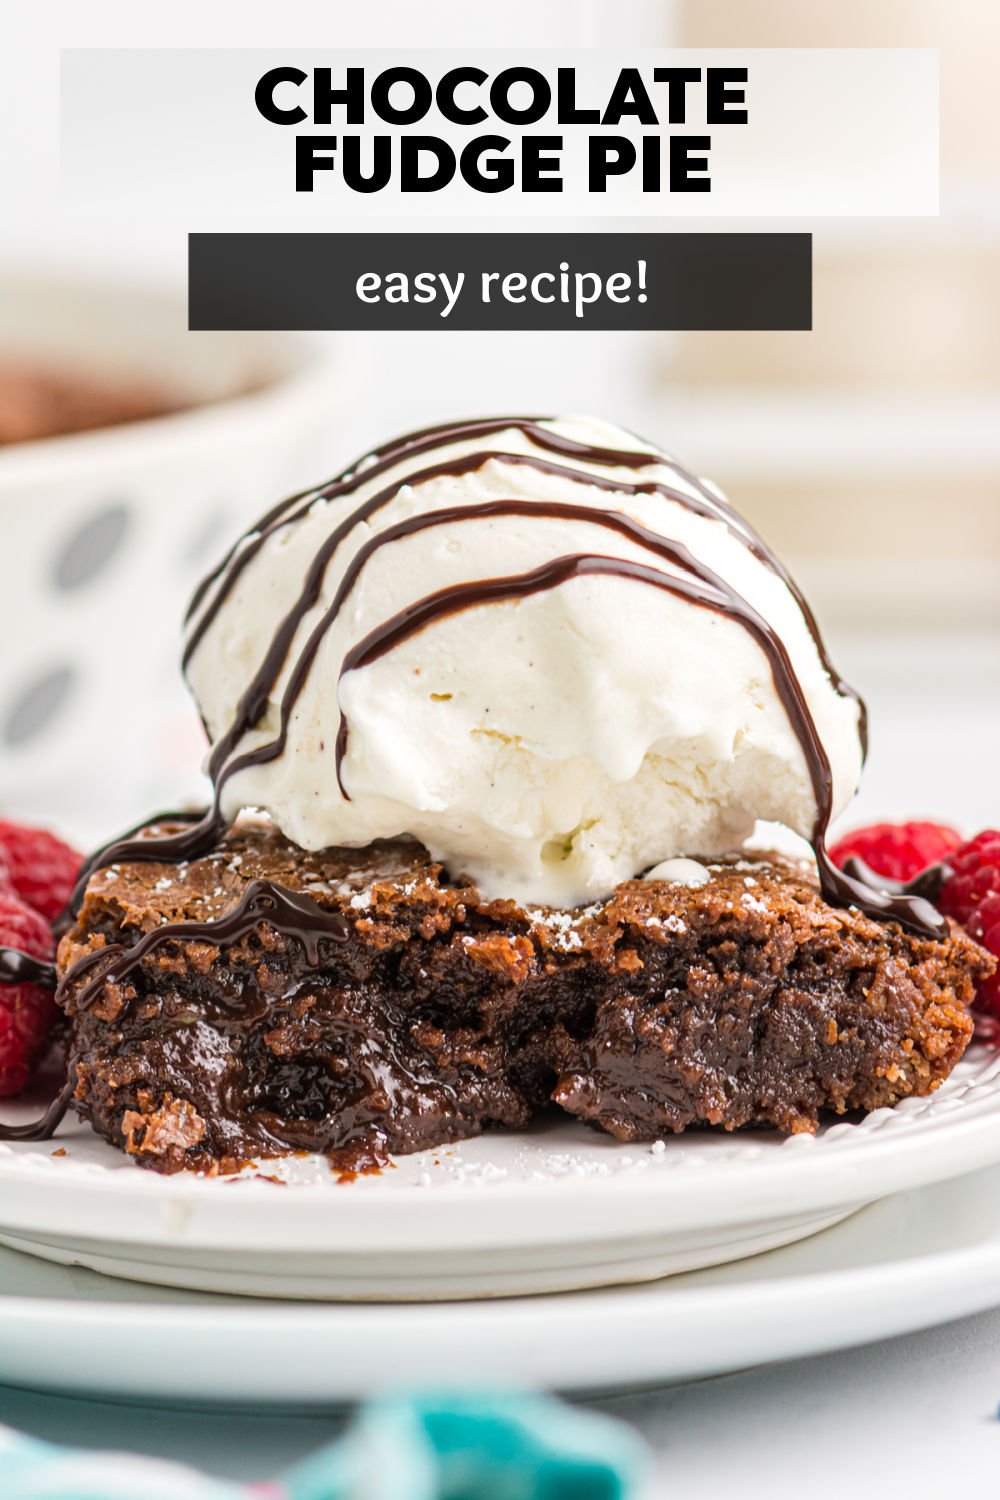 This ooey, gooey vintage Chocolate Fudge Pie only takes seven simple ingredients and 10 minutes to throw together. Something like an upside down hot fudge sundae, this easy fudge pie will make all your chocolate dreams come true. | www.persnicketyplates.com